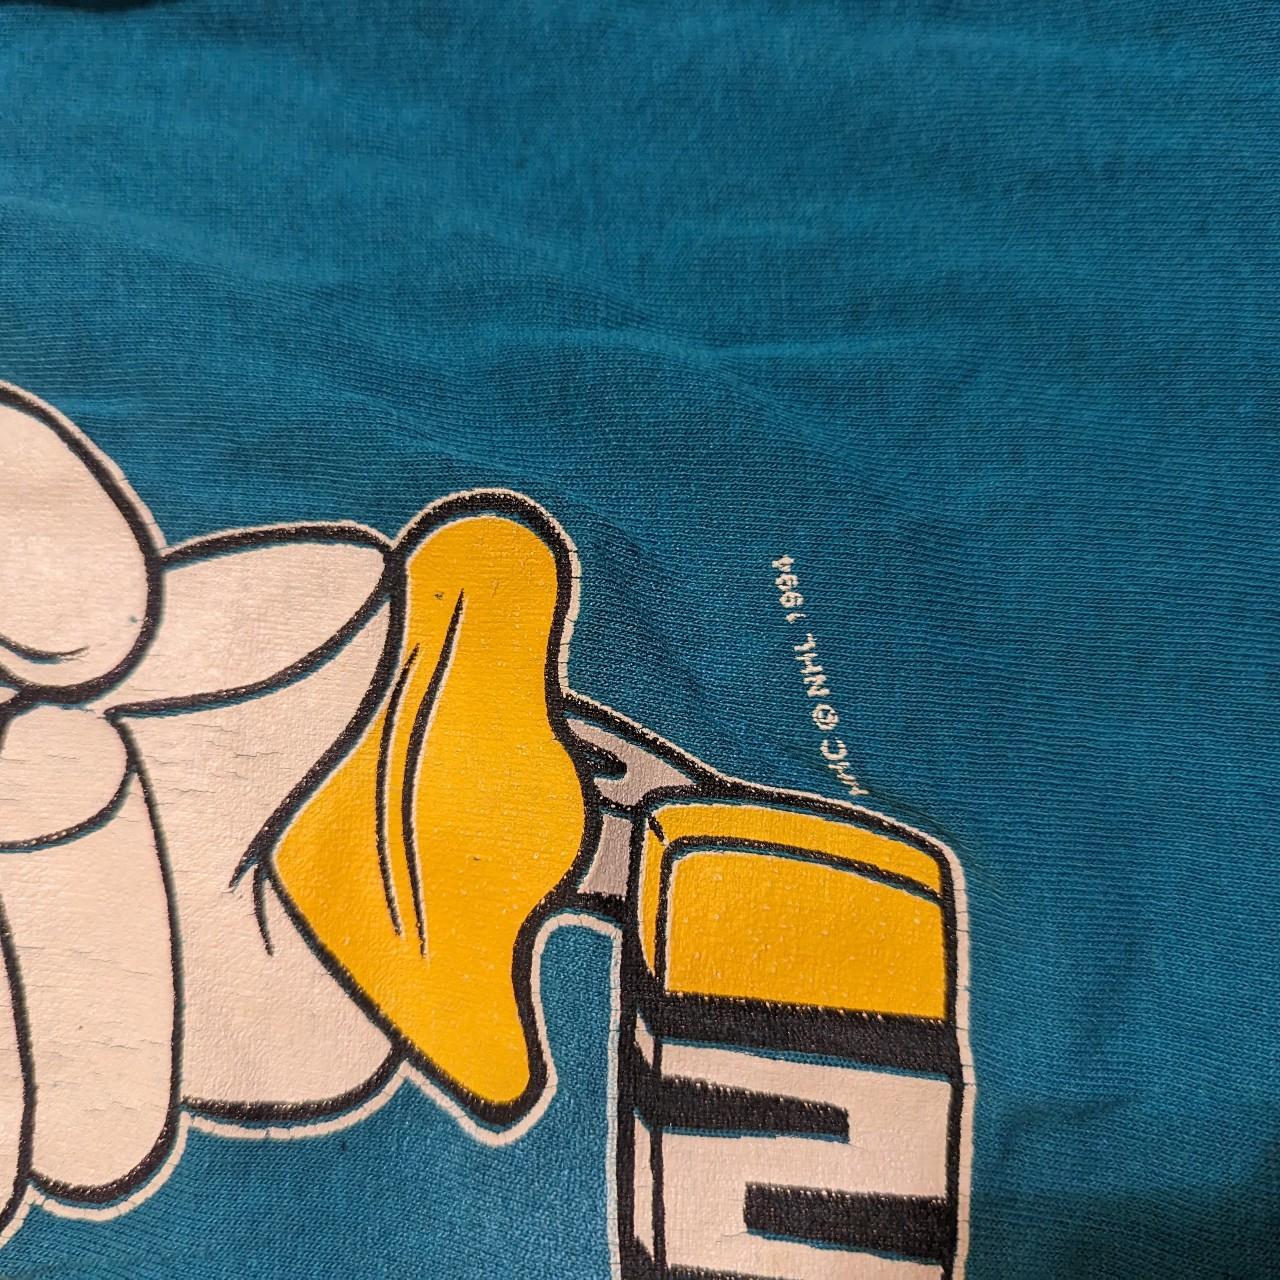 Vintage 1994 Mighty Ducks Animated Wild Wing Shirt